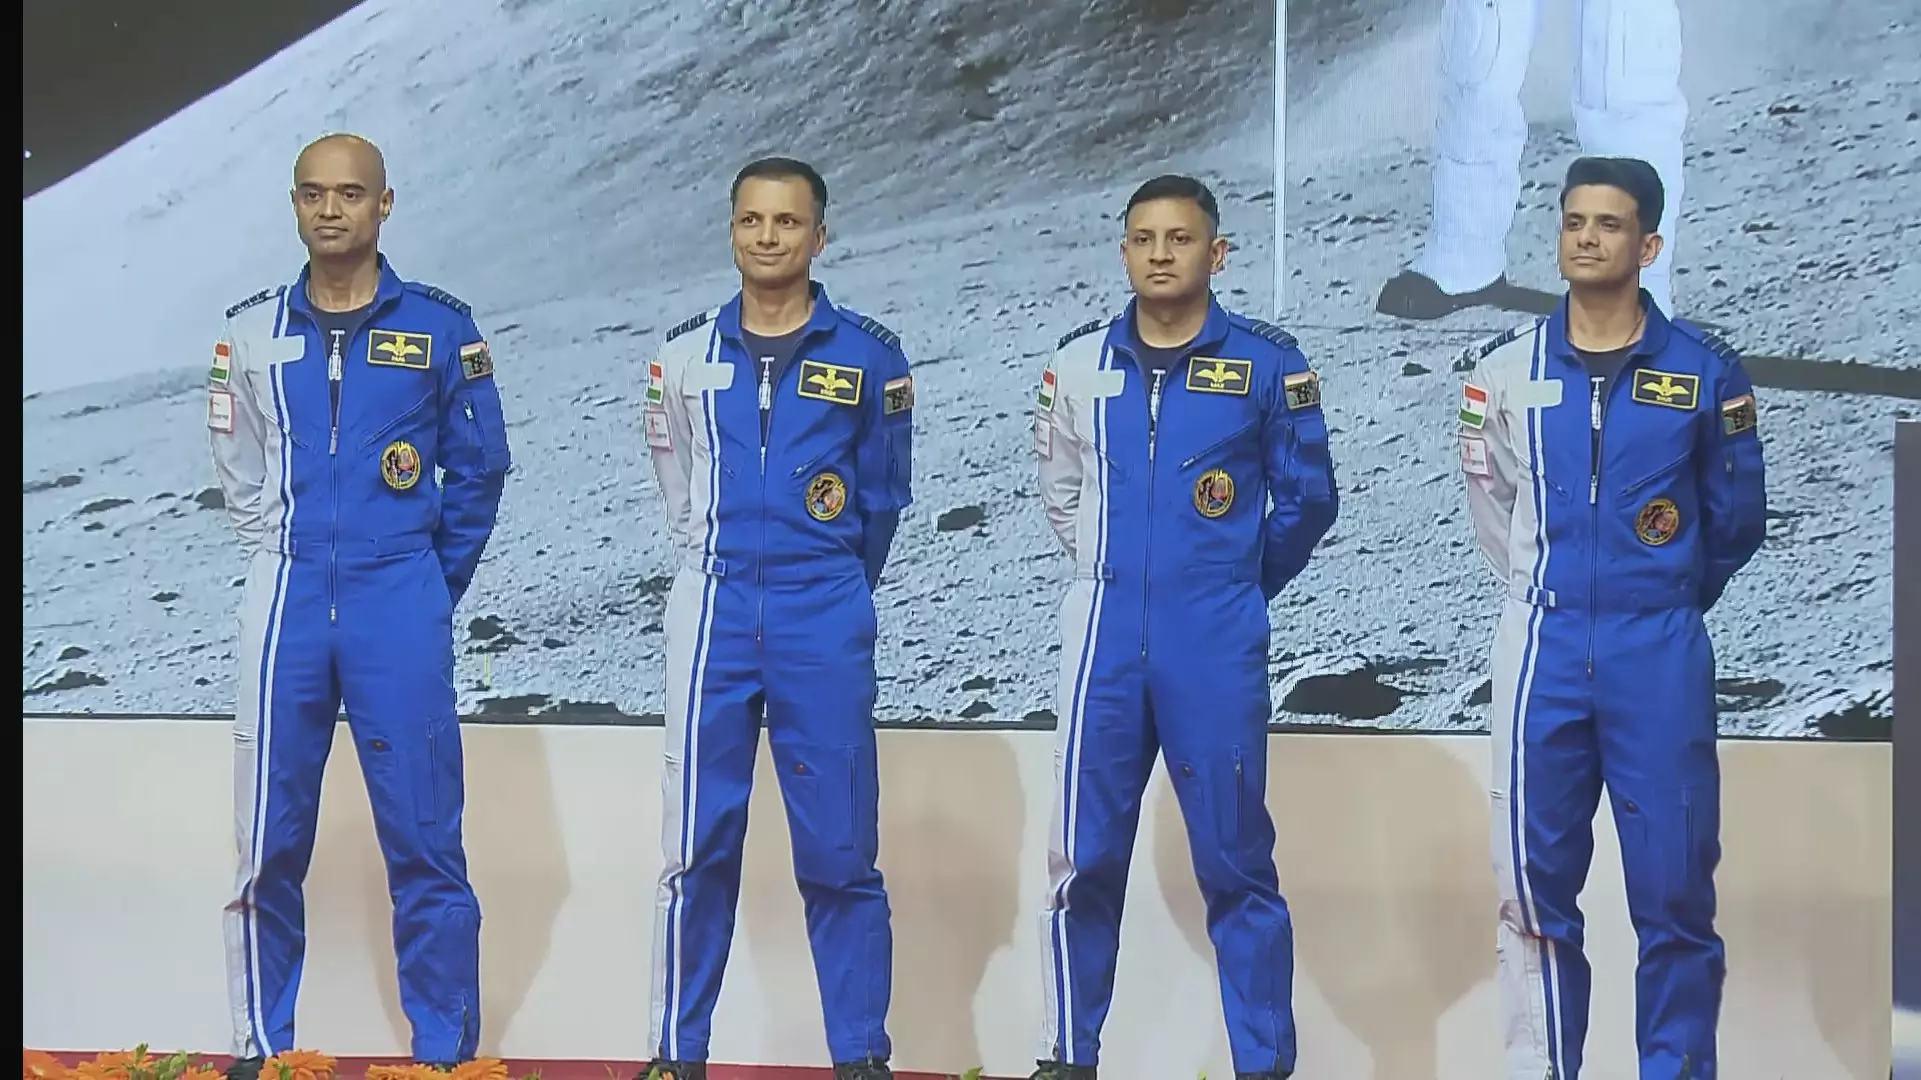 PM Modi introduces four IAF astronauts picked for Gaganyaan mission